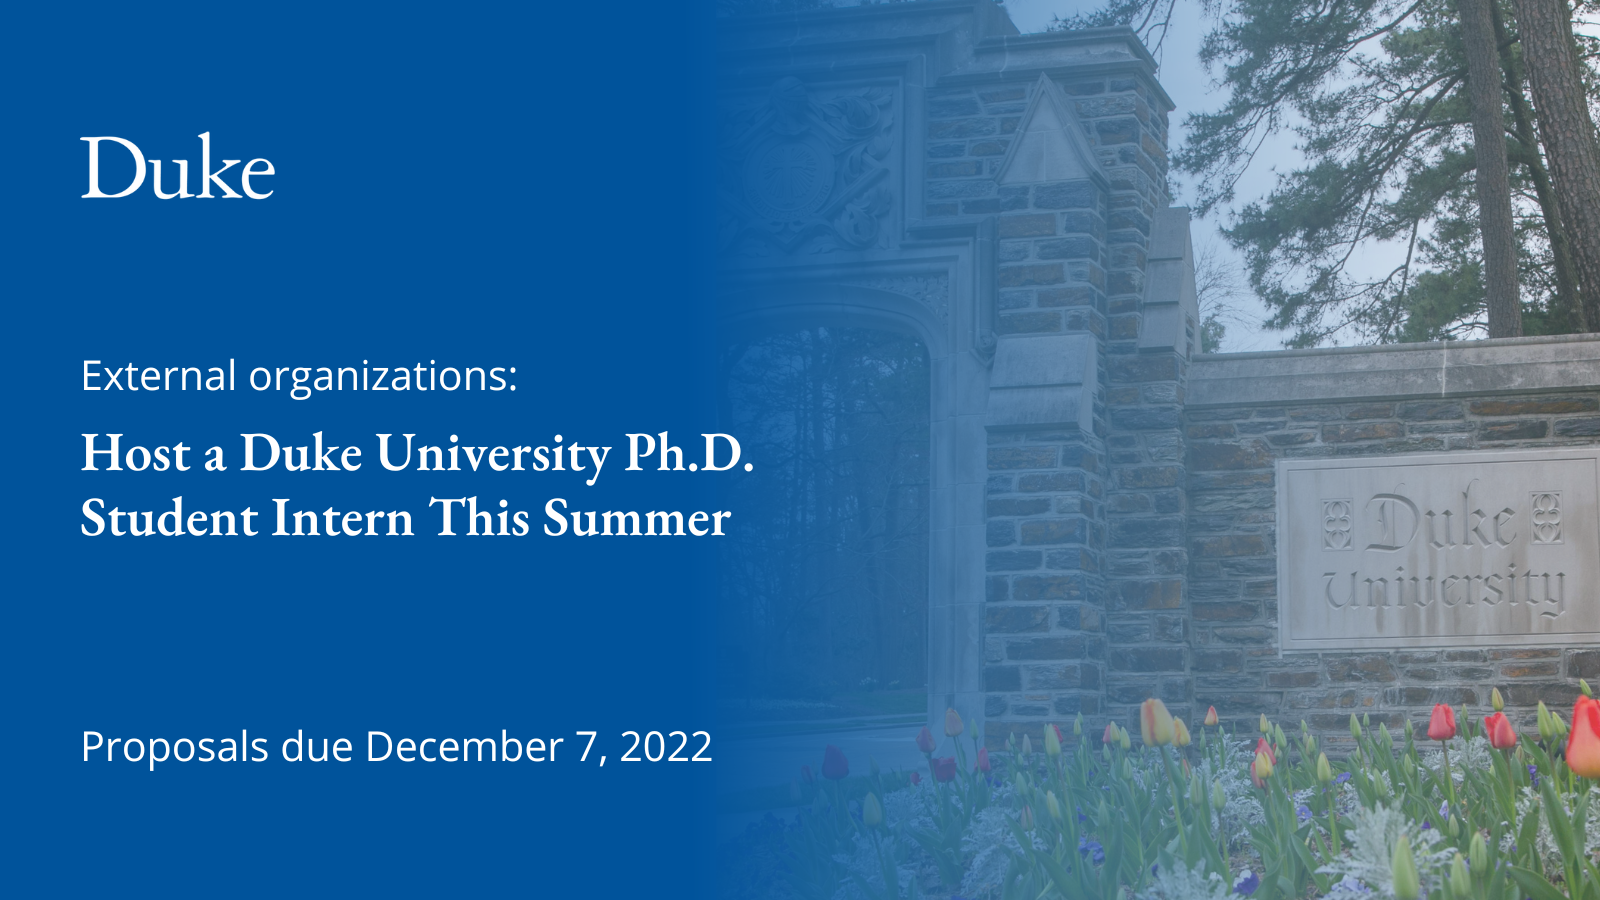 Host a Duke University Ph.D. Student Intern This Text: External organizations: Host a Duke Ph.D. Intern This Summer. Proposals due December 7, 2022. Graphic over photo of stone gate with sign reading Duke University.